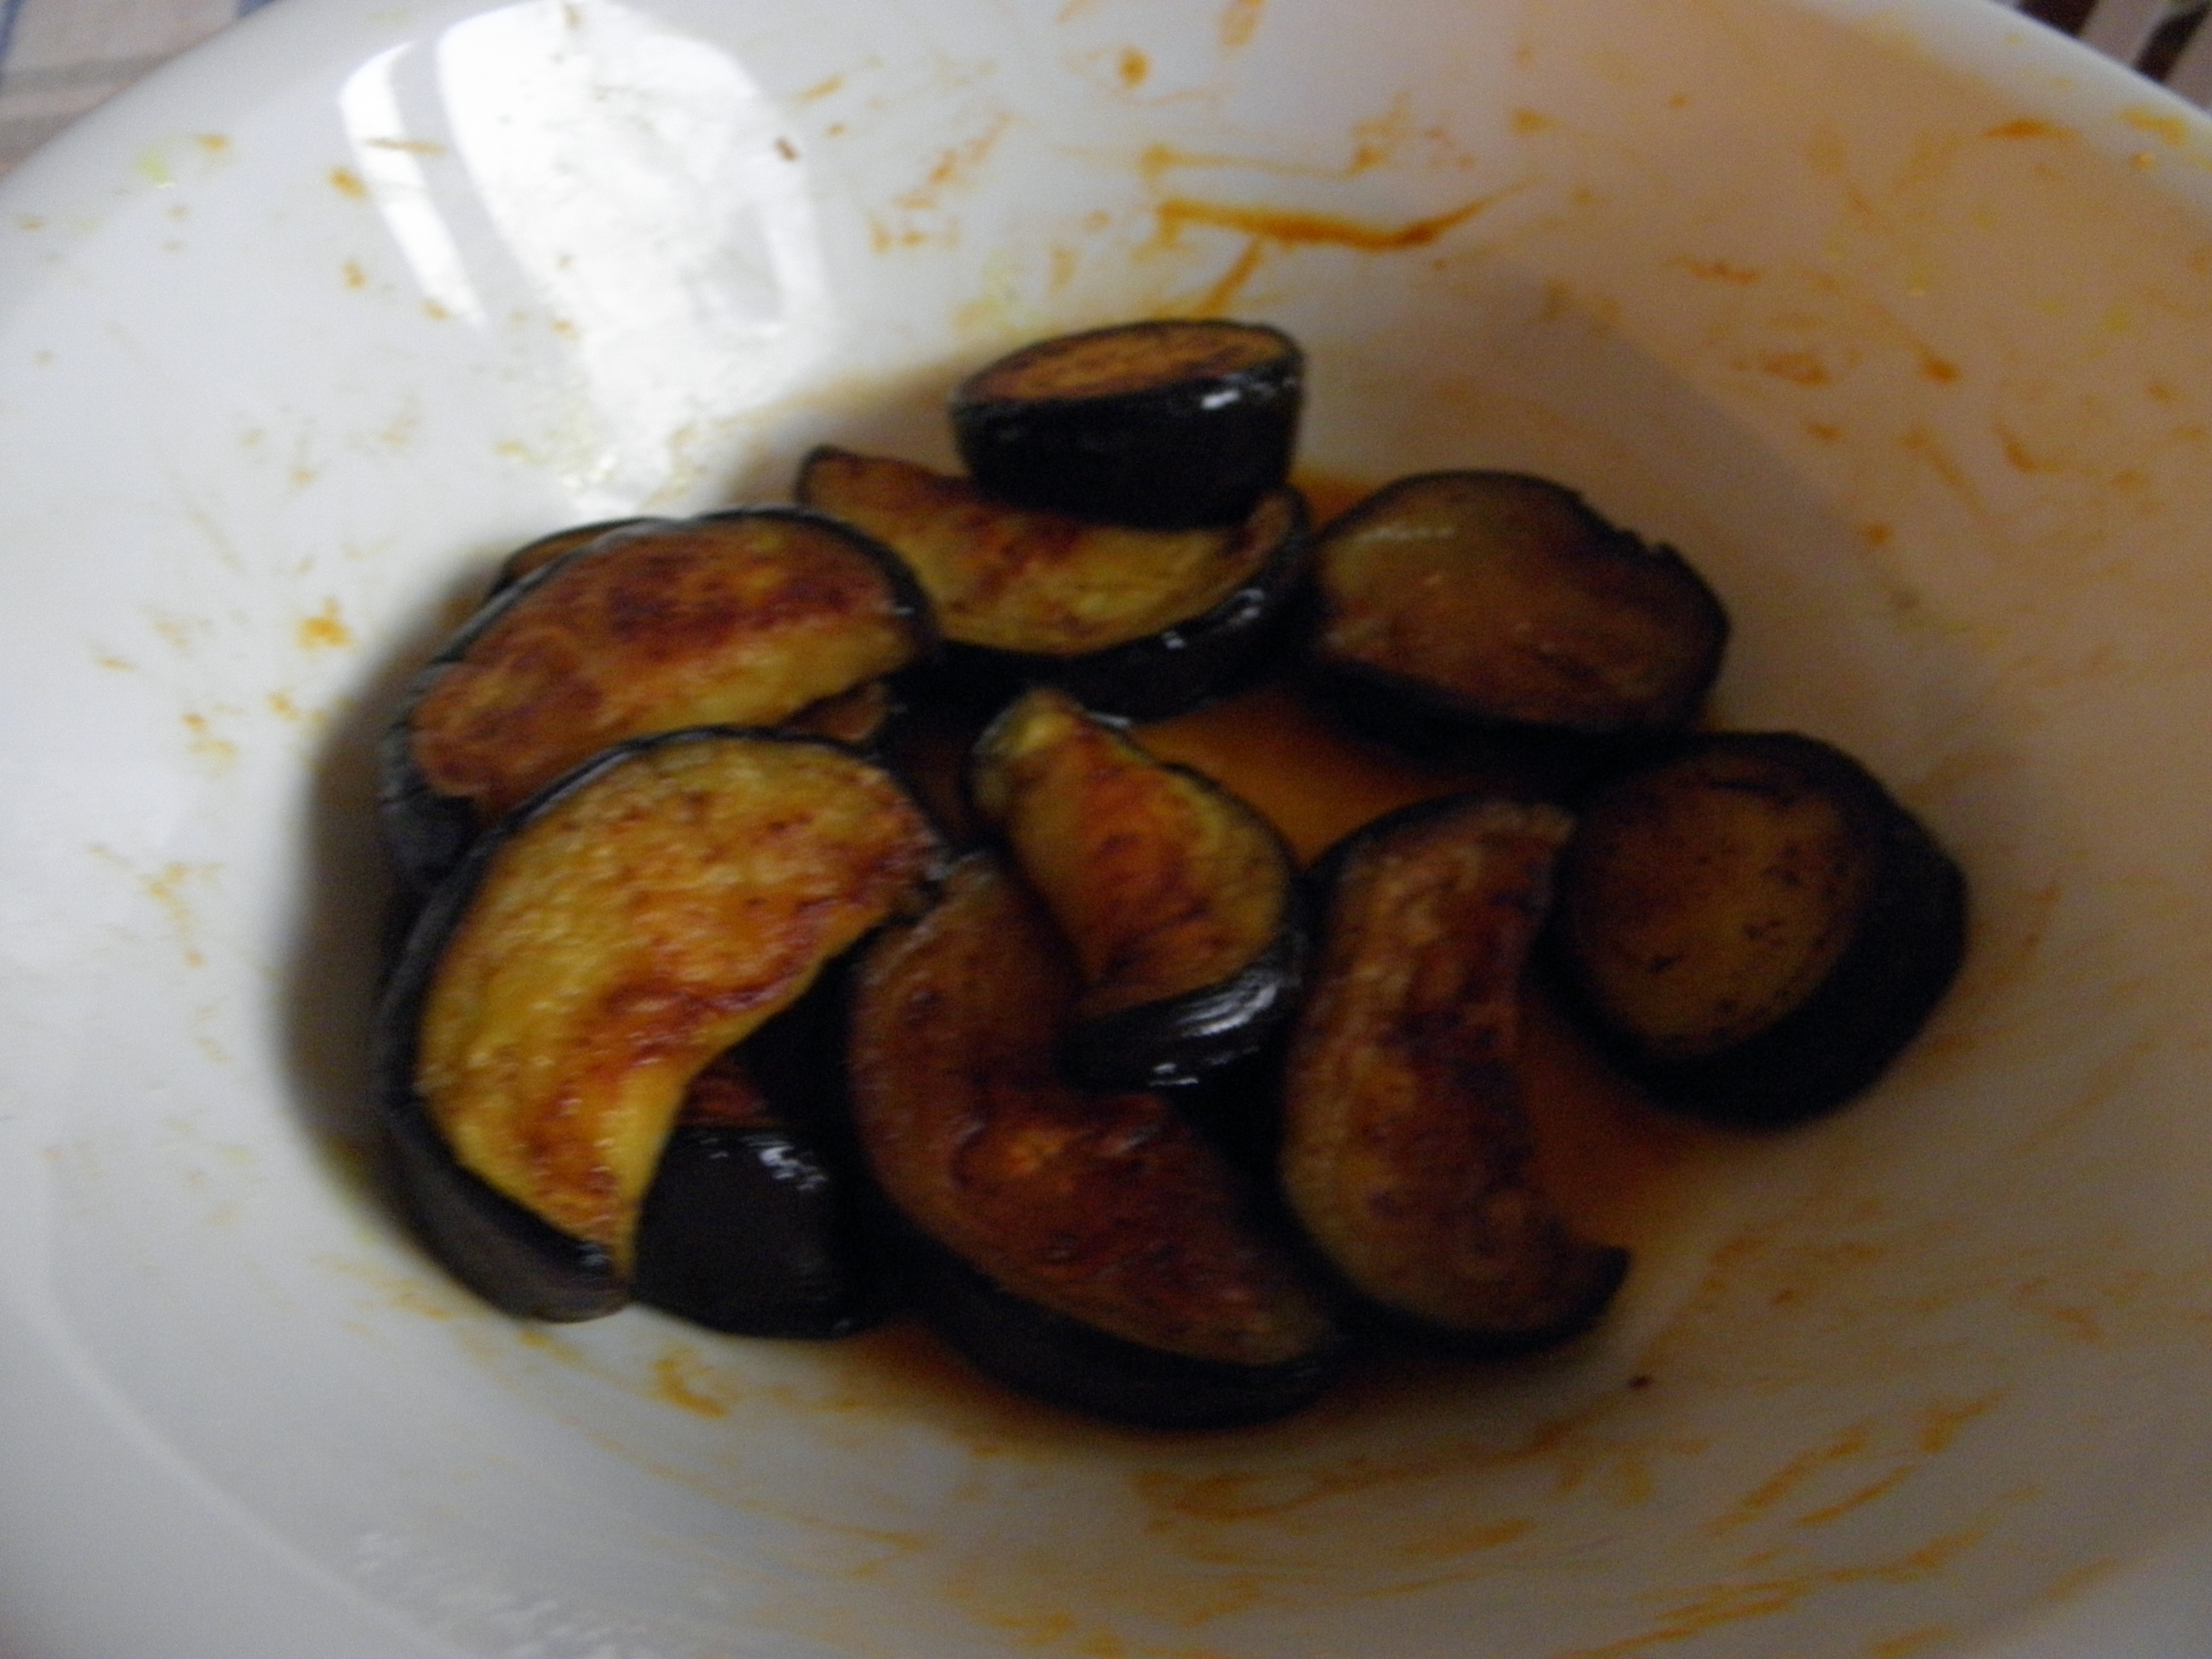 Fried brinjal pieces